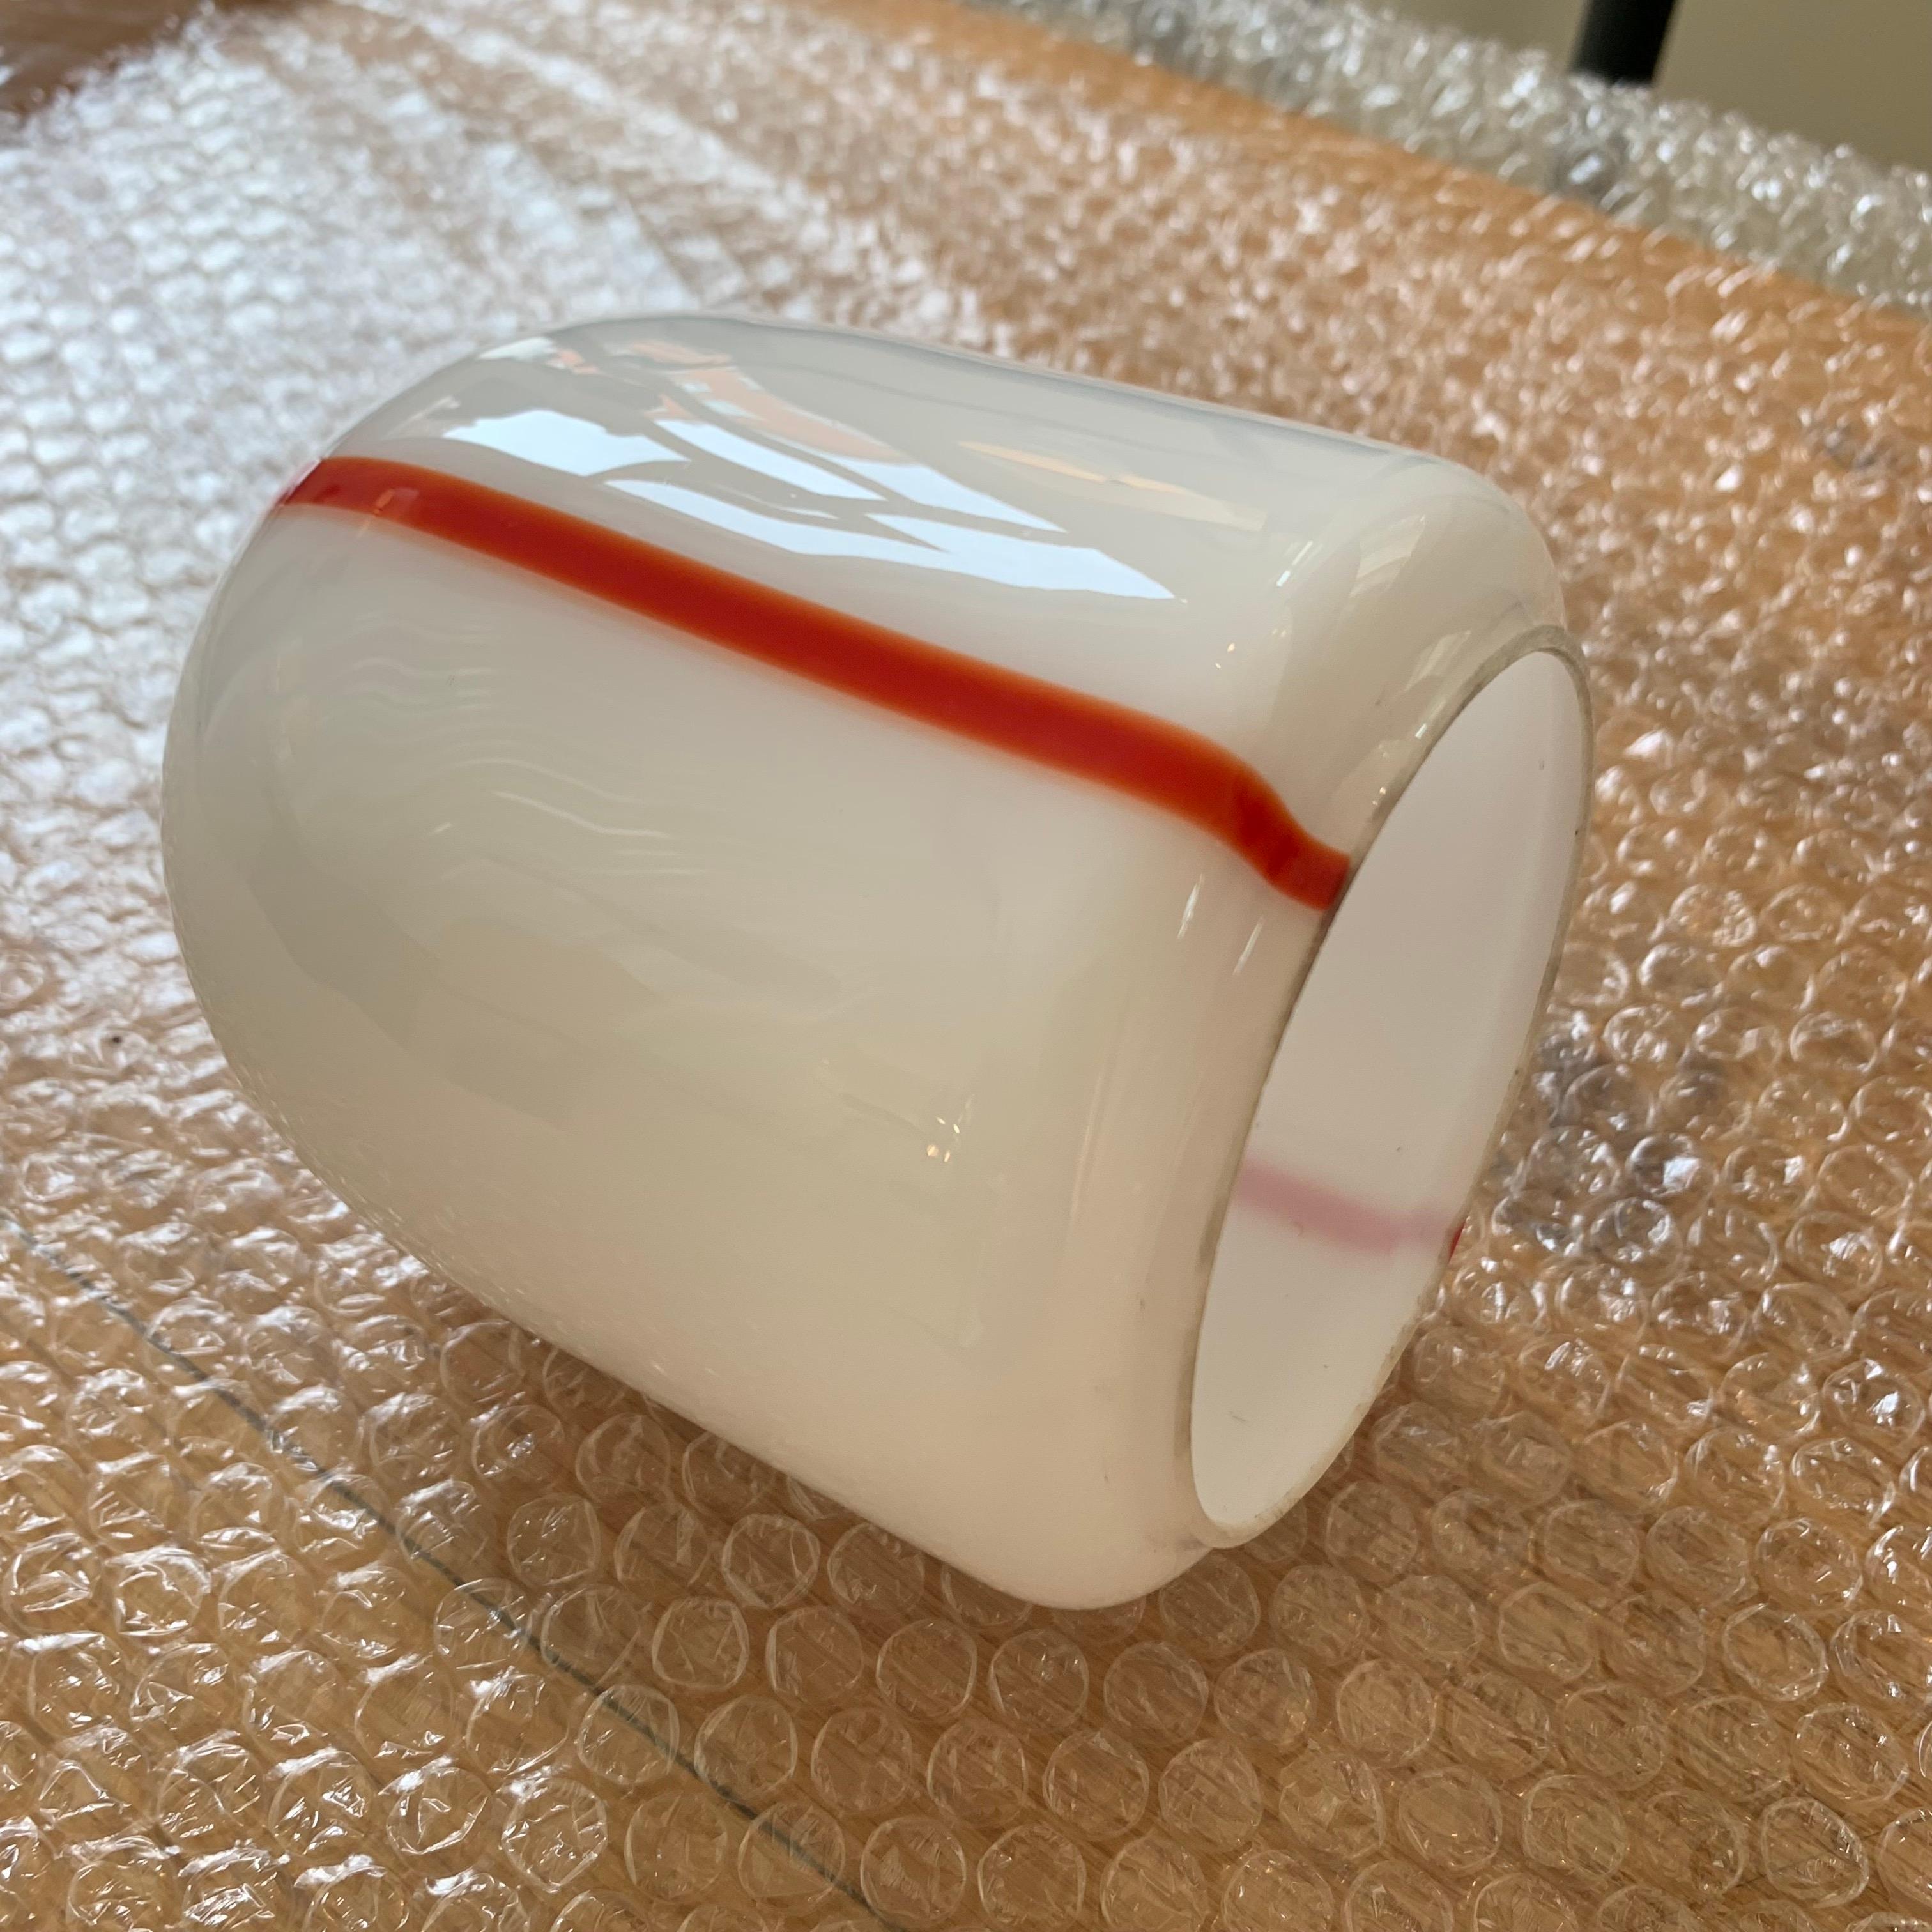  Murano glass element for a sconce Din Linea model, Renato Toso for Leucos, circa 1972, Italy.
White Murano glass with red line.
Dimensions: 13 cm deep, 11 cm diameter.
All purchases are covered by our Buyer Protection Guarantee.
This item can be